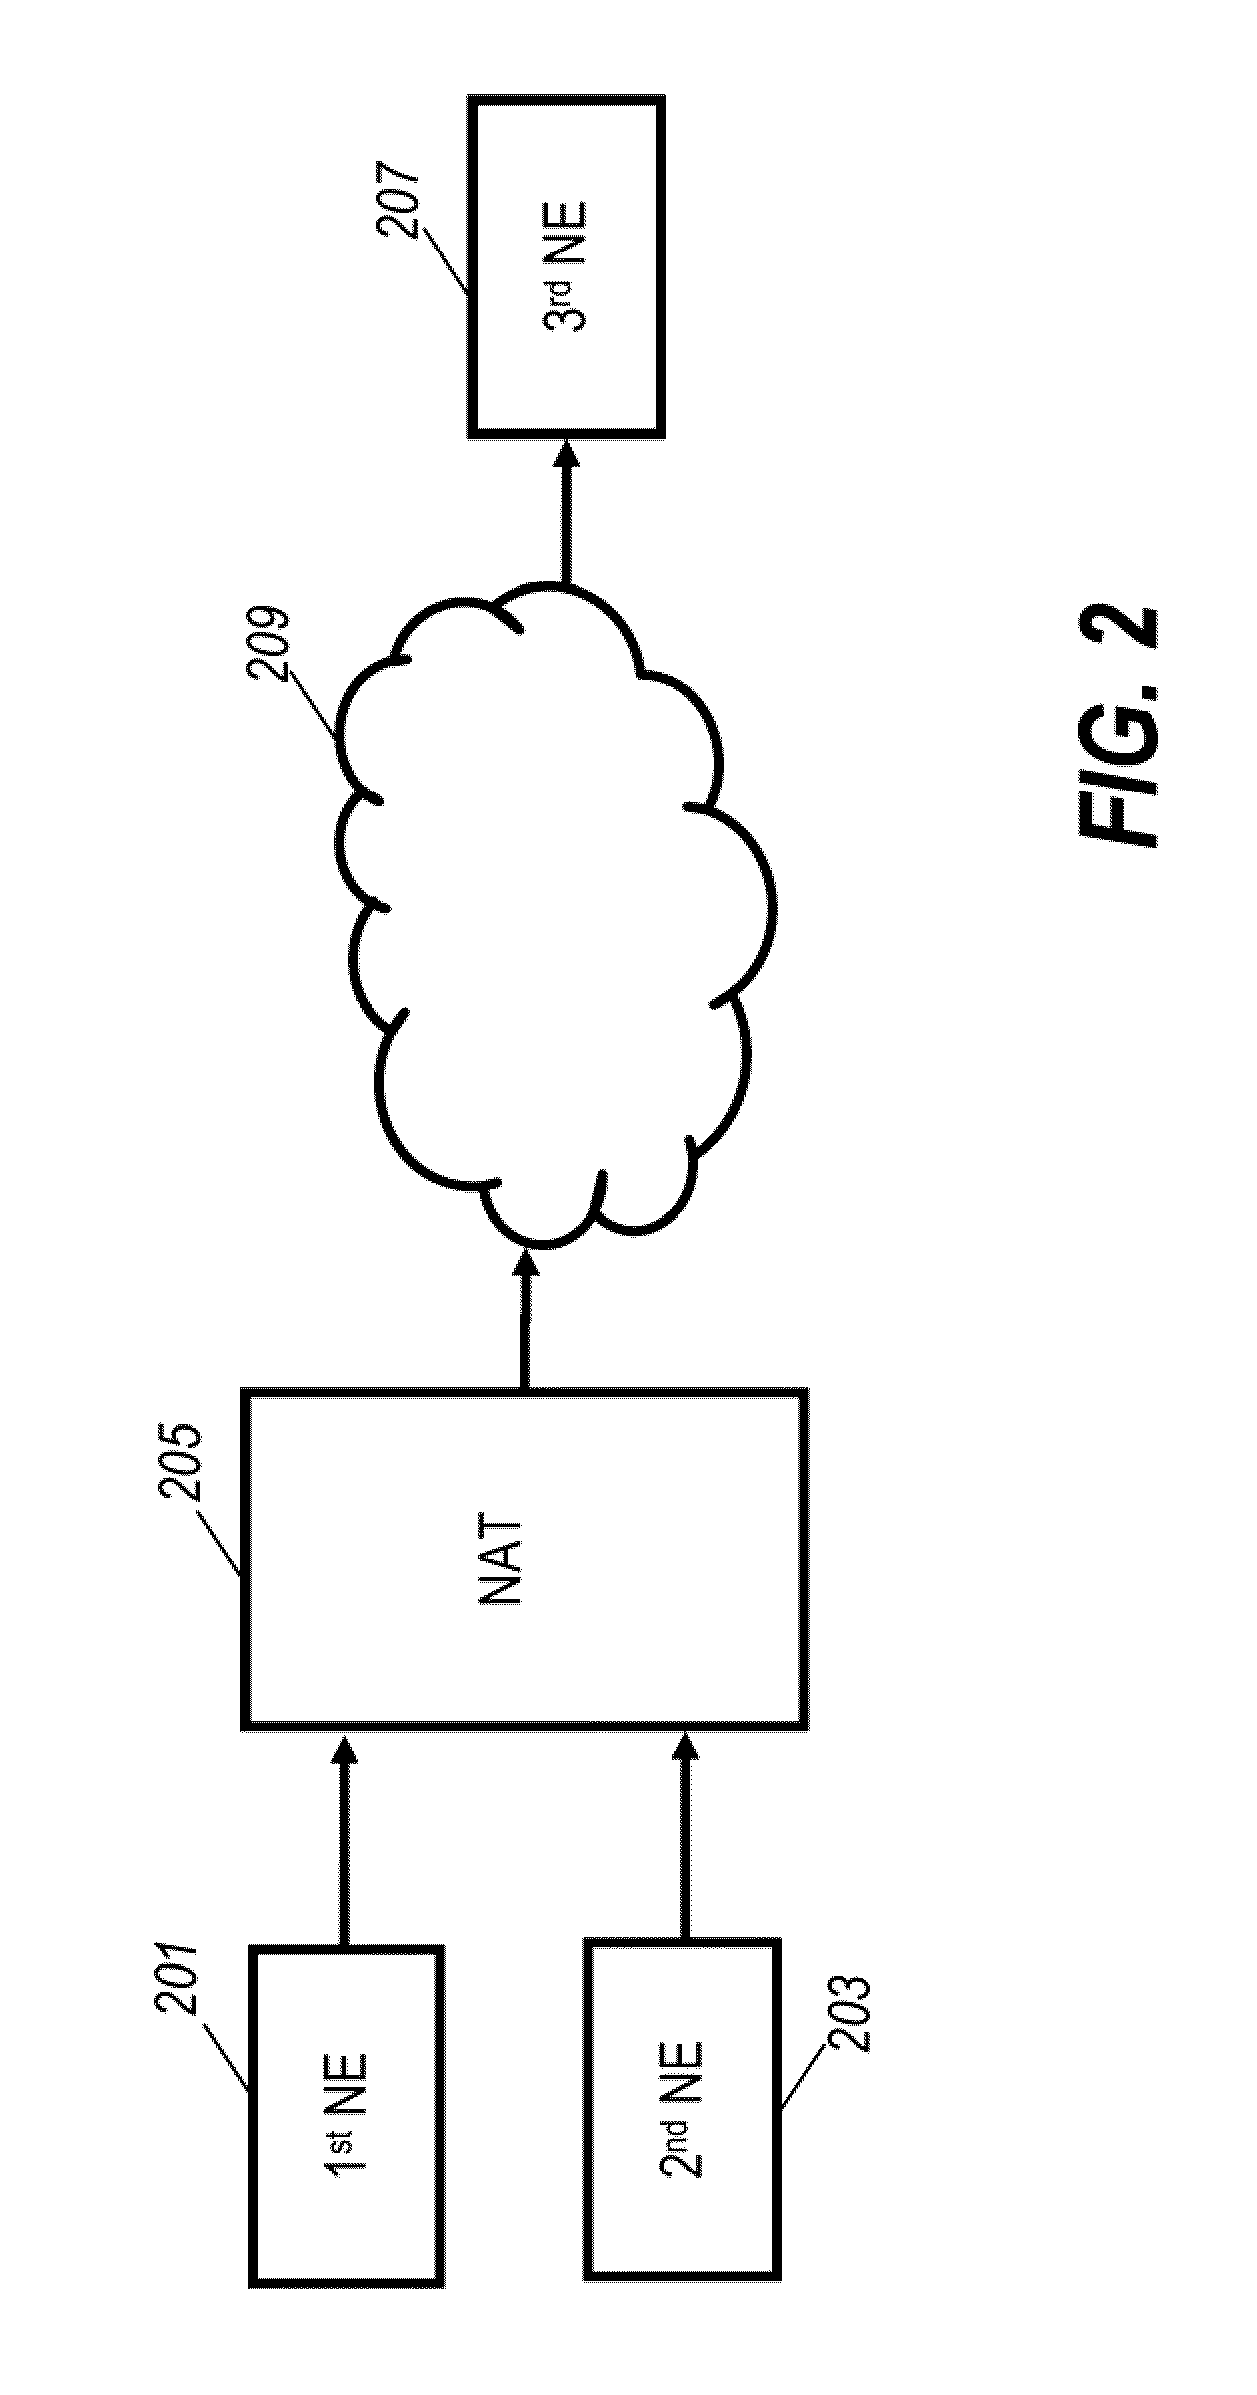 Communication network and method of operation therefor